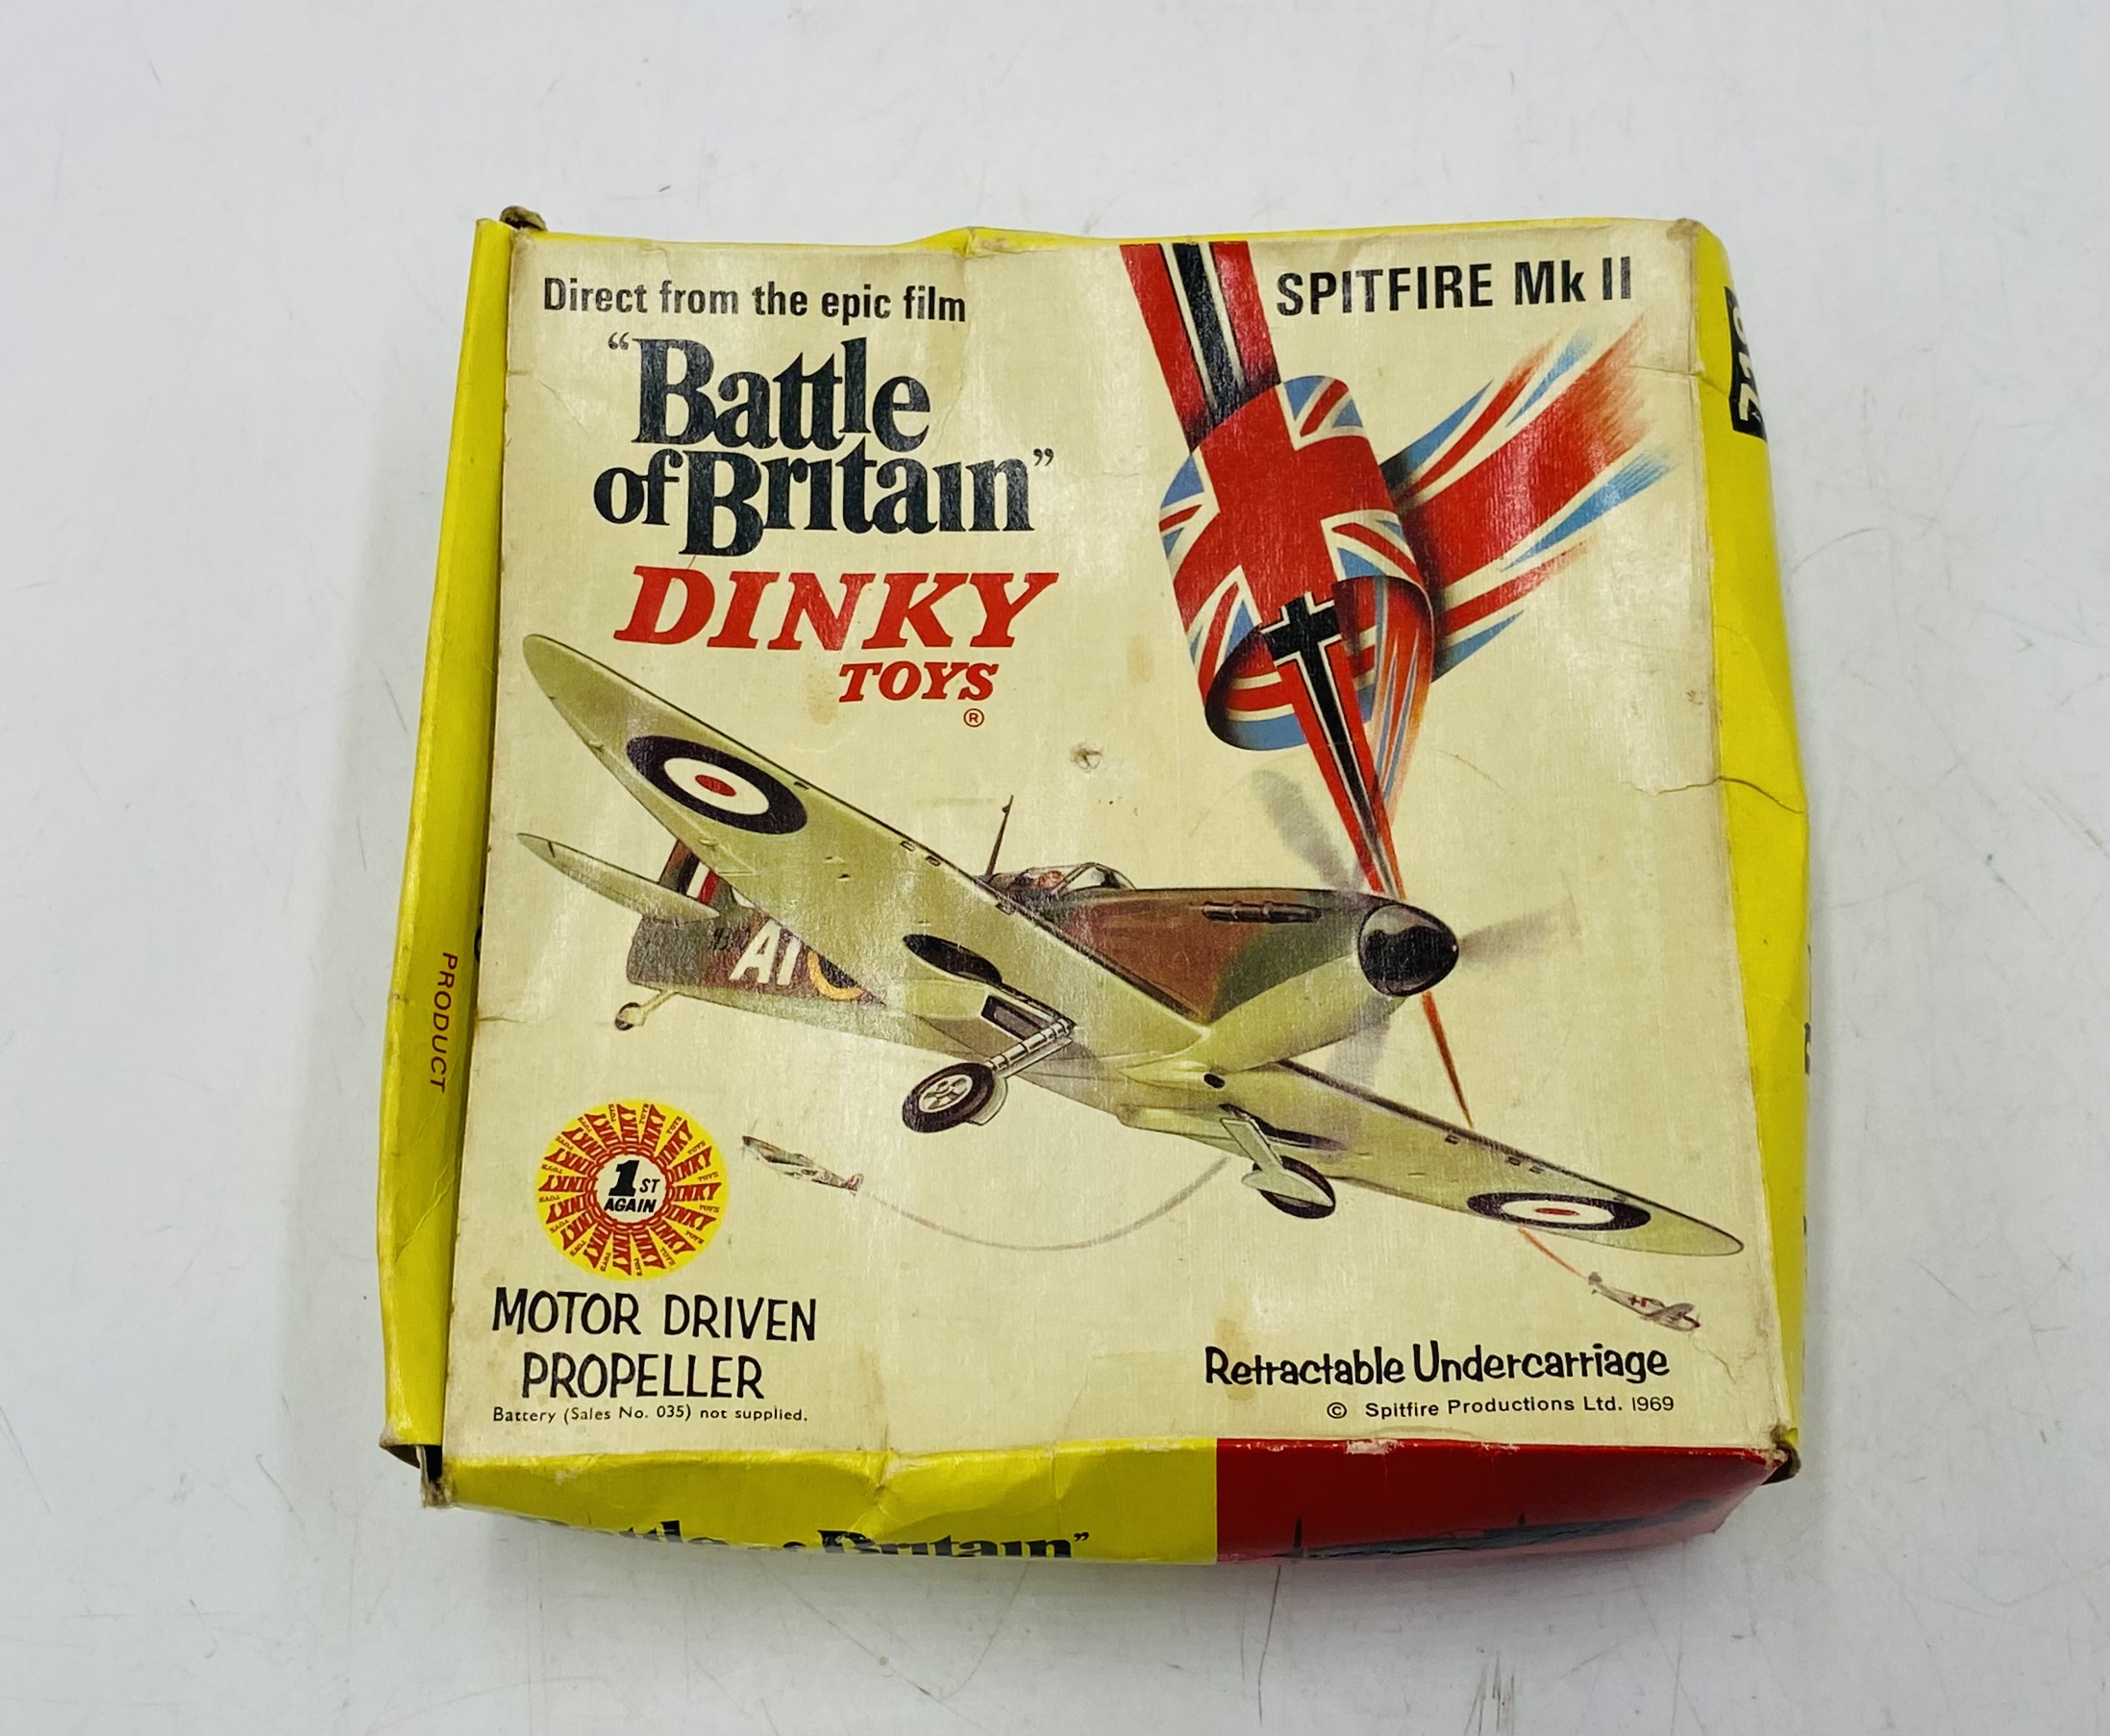 A vintage boxed Dinky Toys "Battle of Britain" Spitfire Mk II die-cast model (No 719) - Image 5 of 7